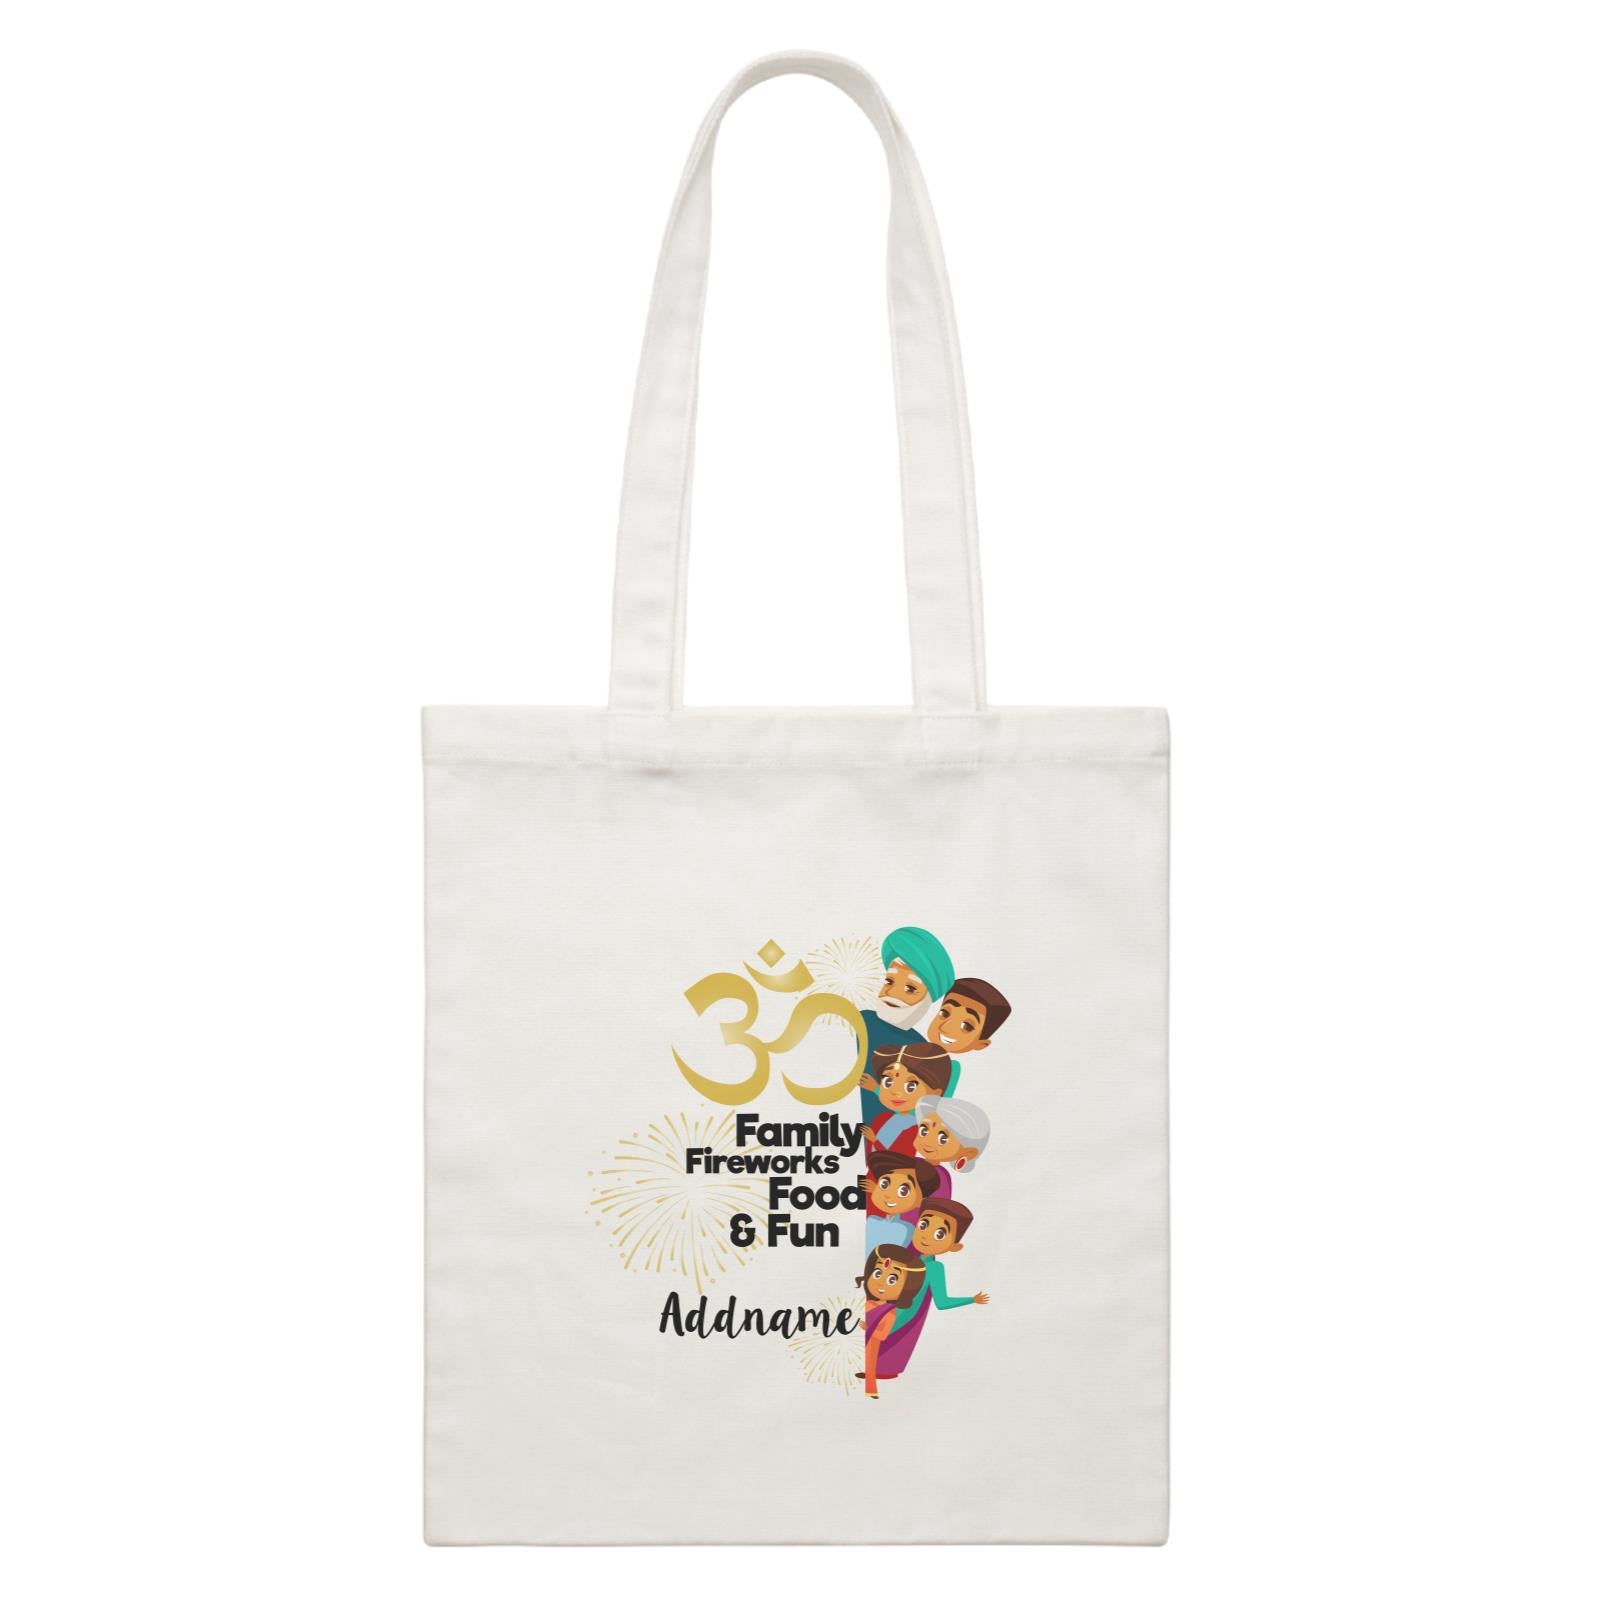 Cute Family OM Family Fireworks Food and Fun Addname White Canvas Bag